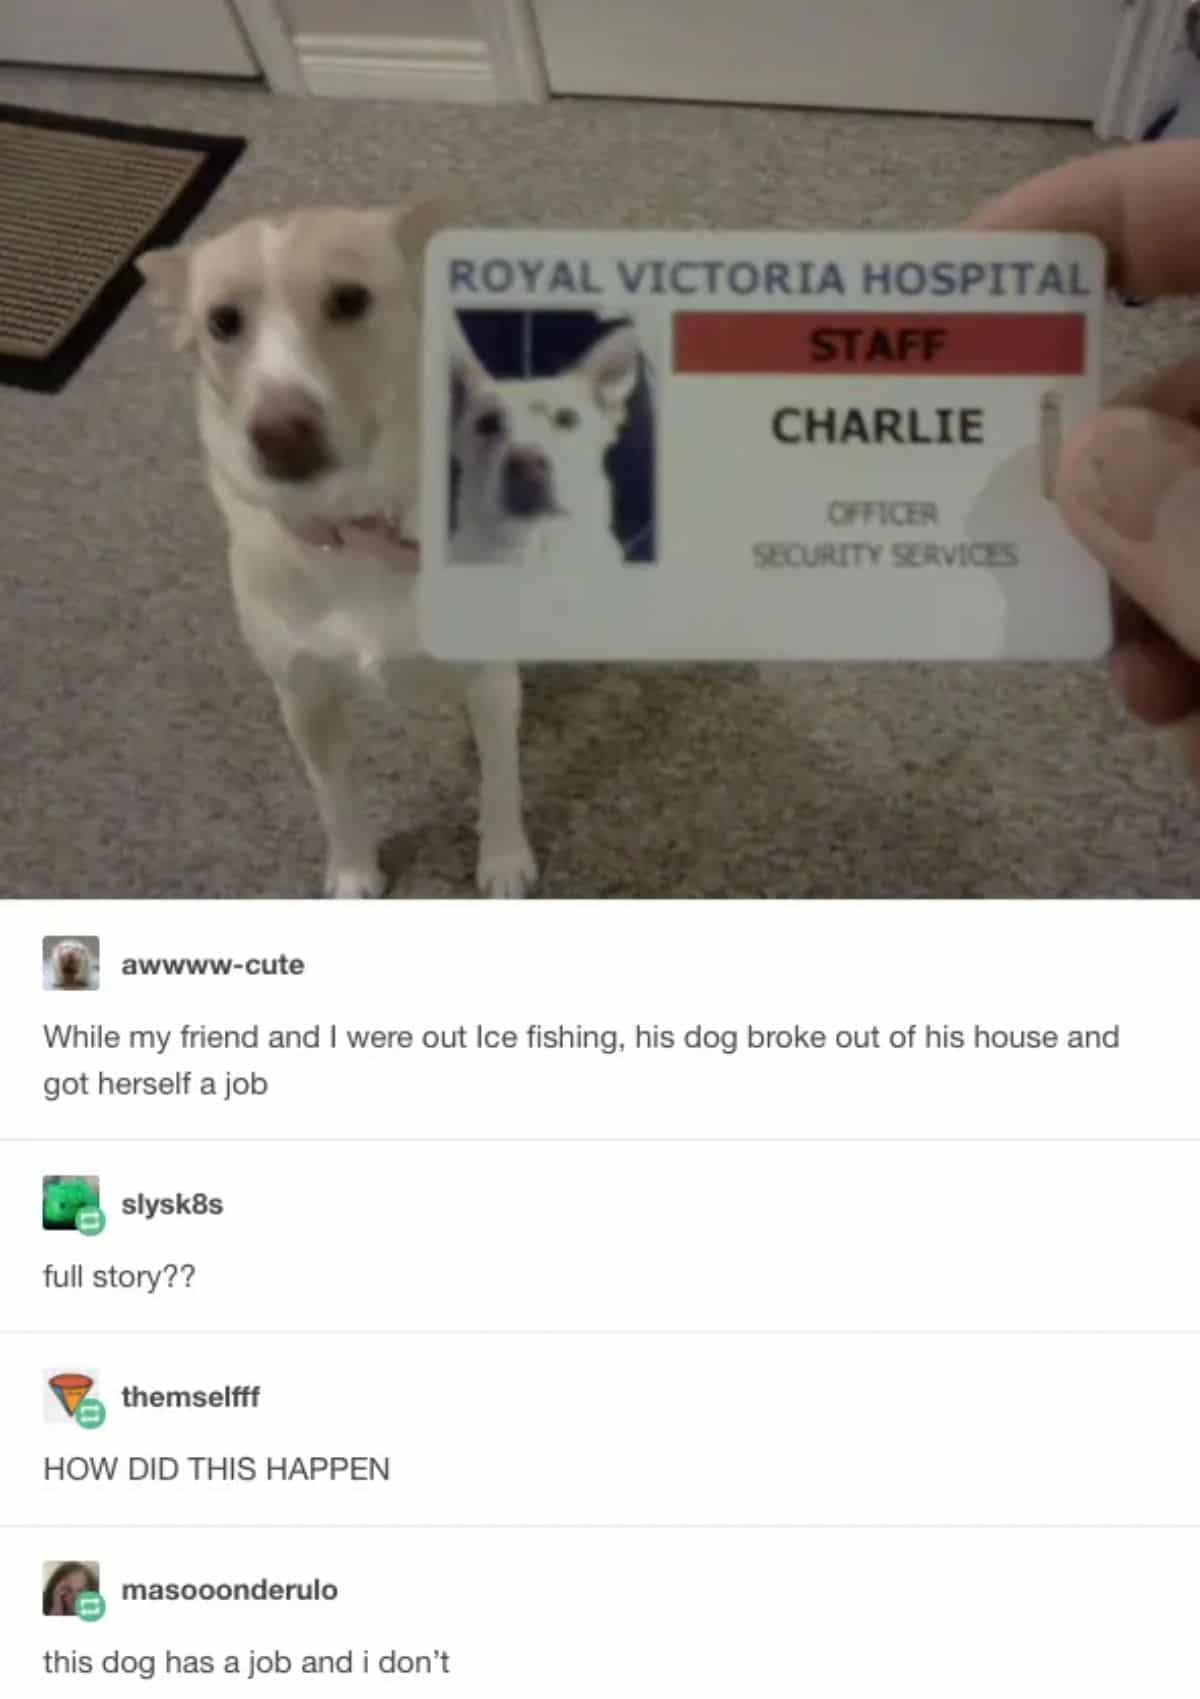 brown and white dog sitting on floor with someone holding up a Royal Victoria Hospital Staff ID for the dog Charlie